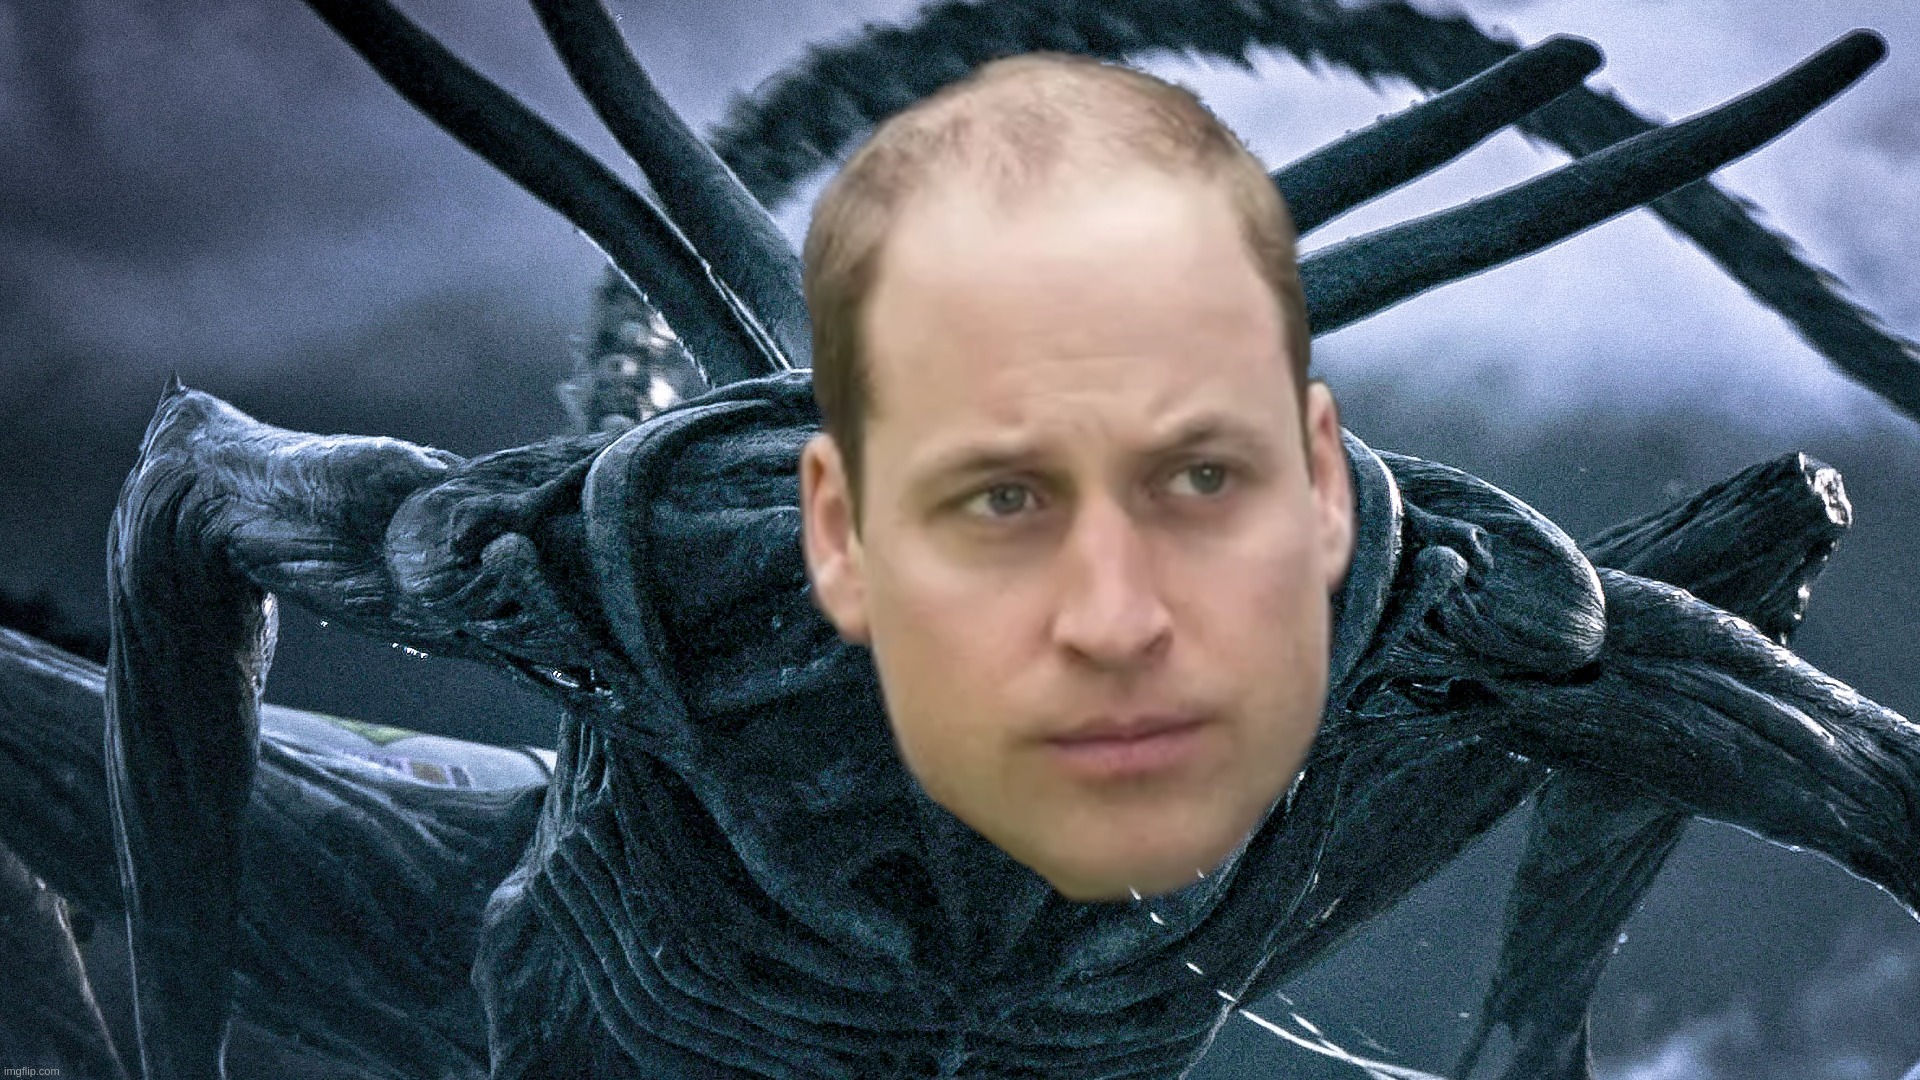 Prince William Xenomorph of the Covenant | image tagged in prince,william,xenomorph,covenant,alien | made w/ Imgflip meme maker